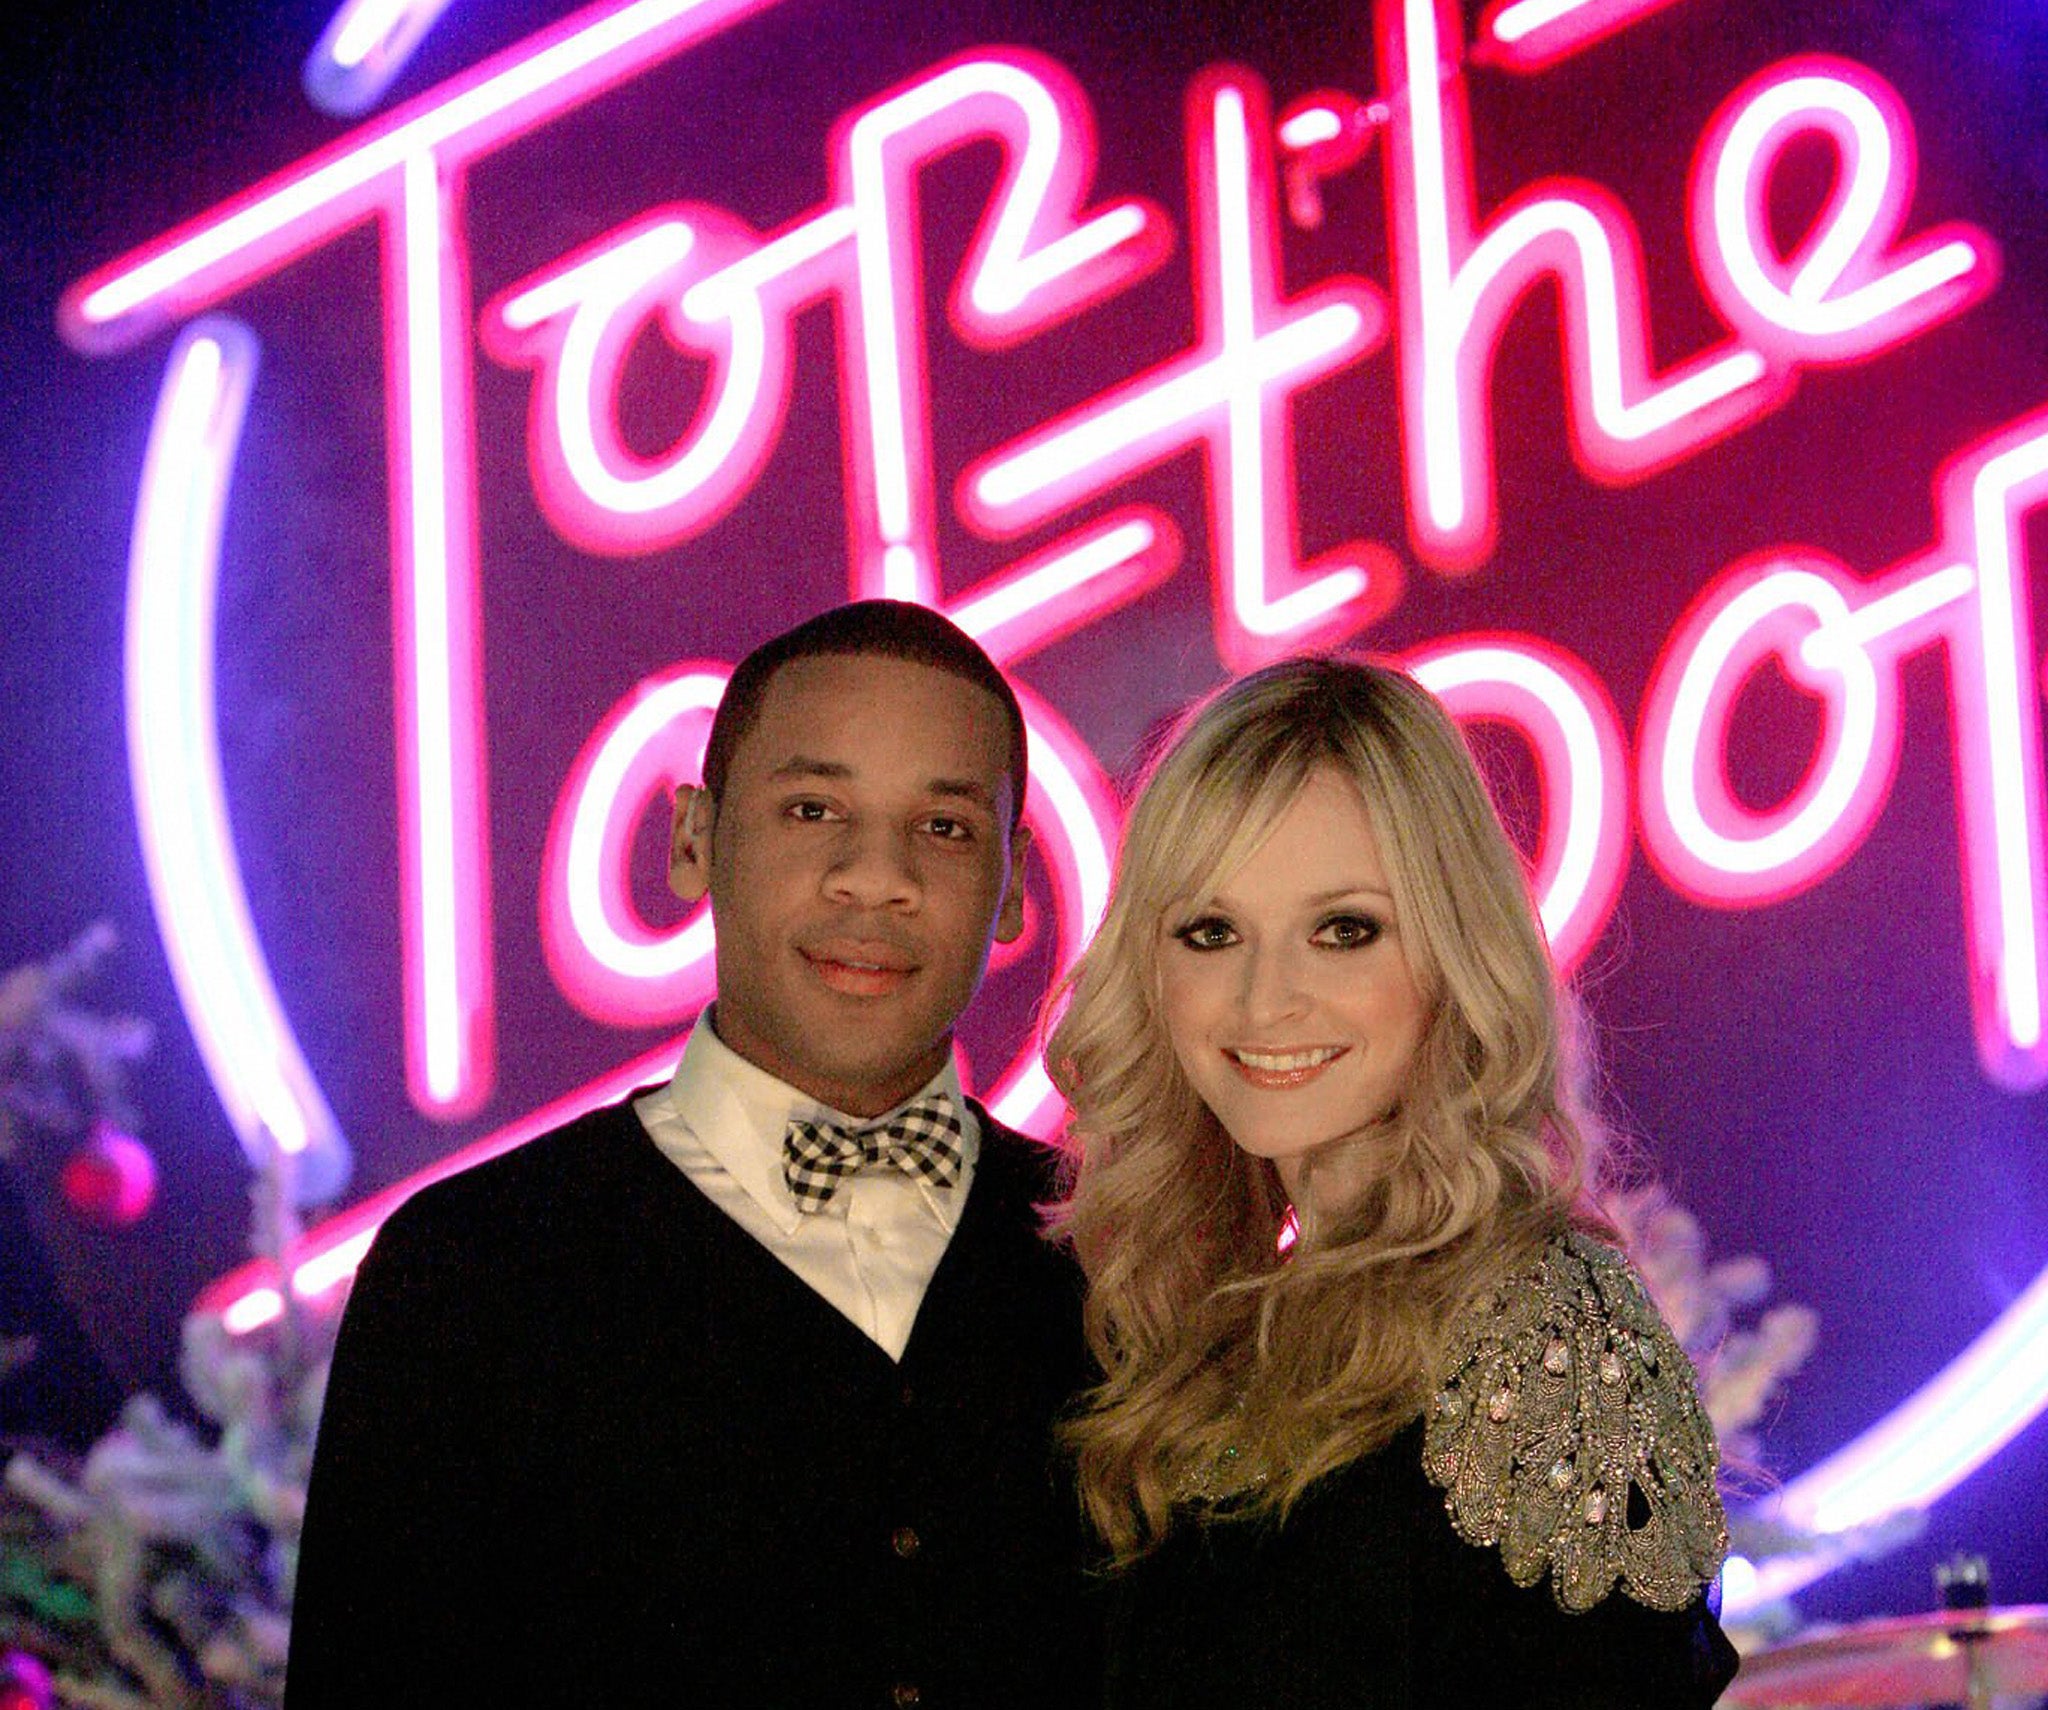 Reggie Yates and Fearne Cotton presenting Top of the Pops